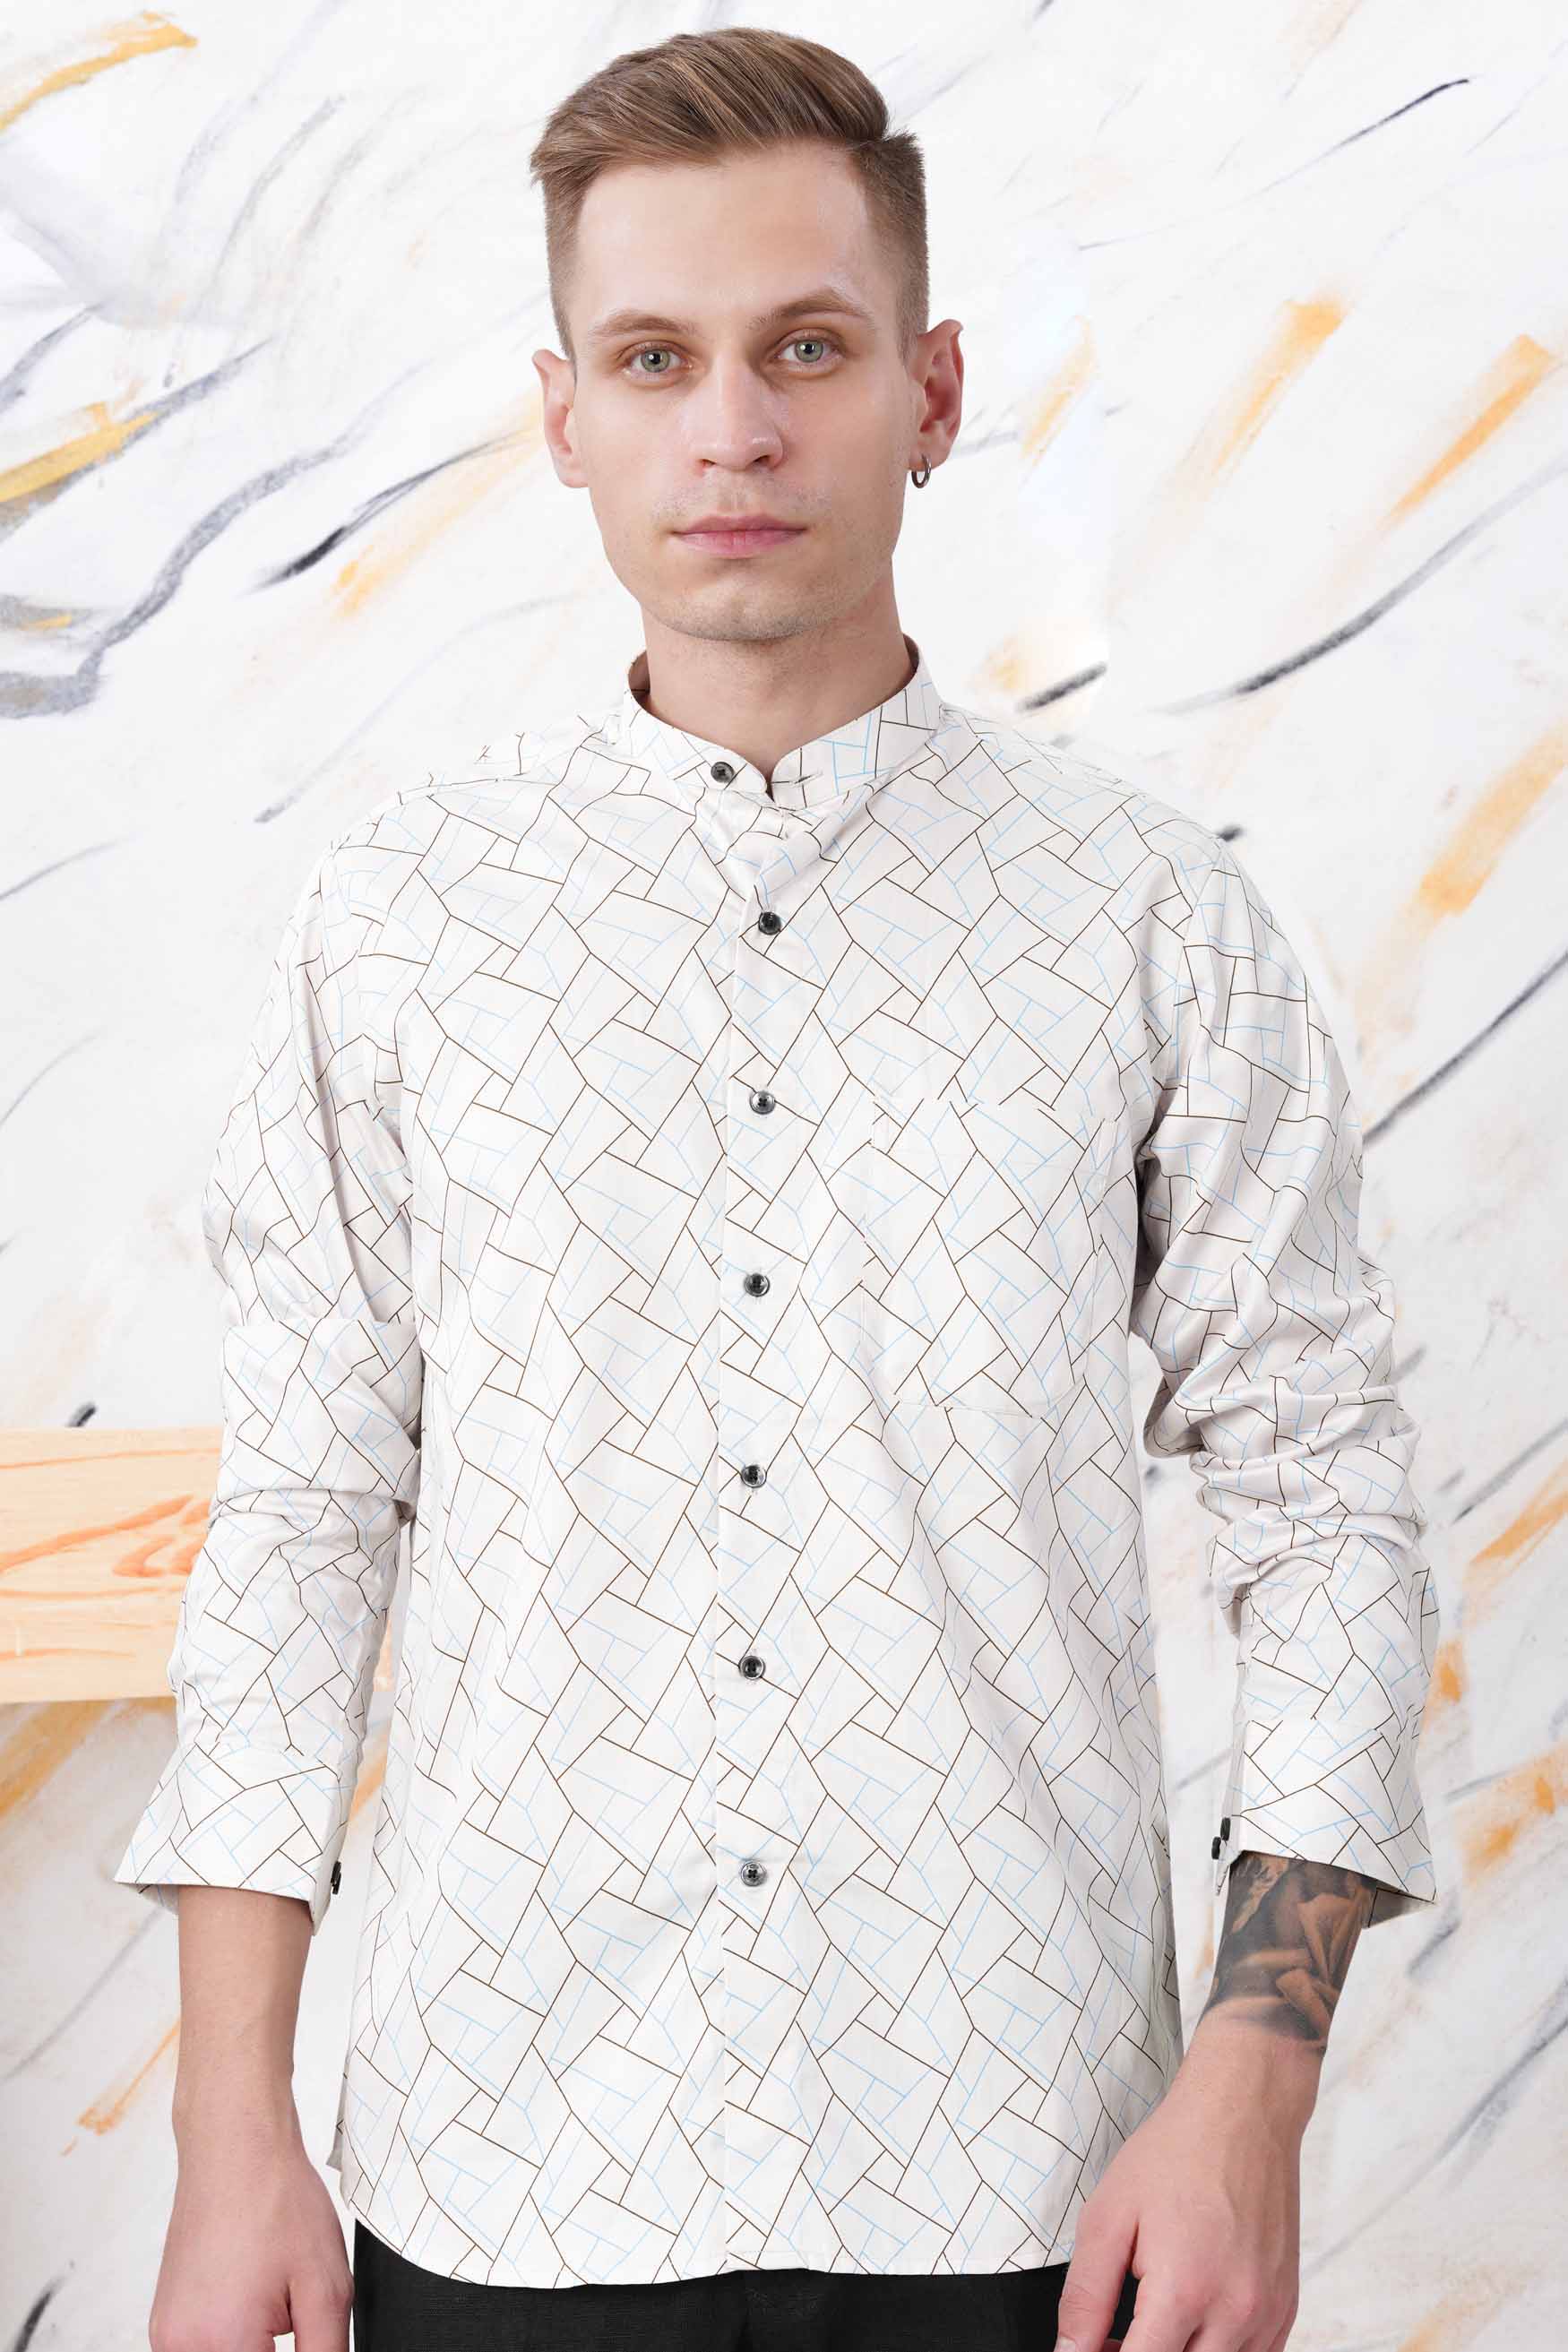 Bright White with Quincy Brown and Carolina Blue Abstract Printed Subtle Sheen Super Soft Premium Cotton Shirt 11576-M-BLK-38, 11576-M-BLK-H-38, 11576-M-BLK-39, 11576-M-BLK-H-39, 11576-M-BLK-40, 11576-M-BLK-H-40, 11576-M-BLK-42, 11576-M-BLK-H-42, 11576-M-BLK-44, 11576-M-BLK-H-44, 11576-M-BLK-46, 11576-M-BLK-H-46, 11576-M-BLK-48, 11576-M-BLK-H-48, 11576-M-BLK-50, 11576-M-BLK-H-50, 11576-M-BLK-52, 11576-M-BLK-H-52